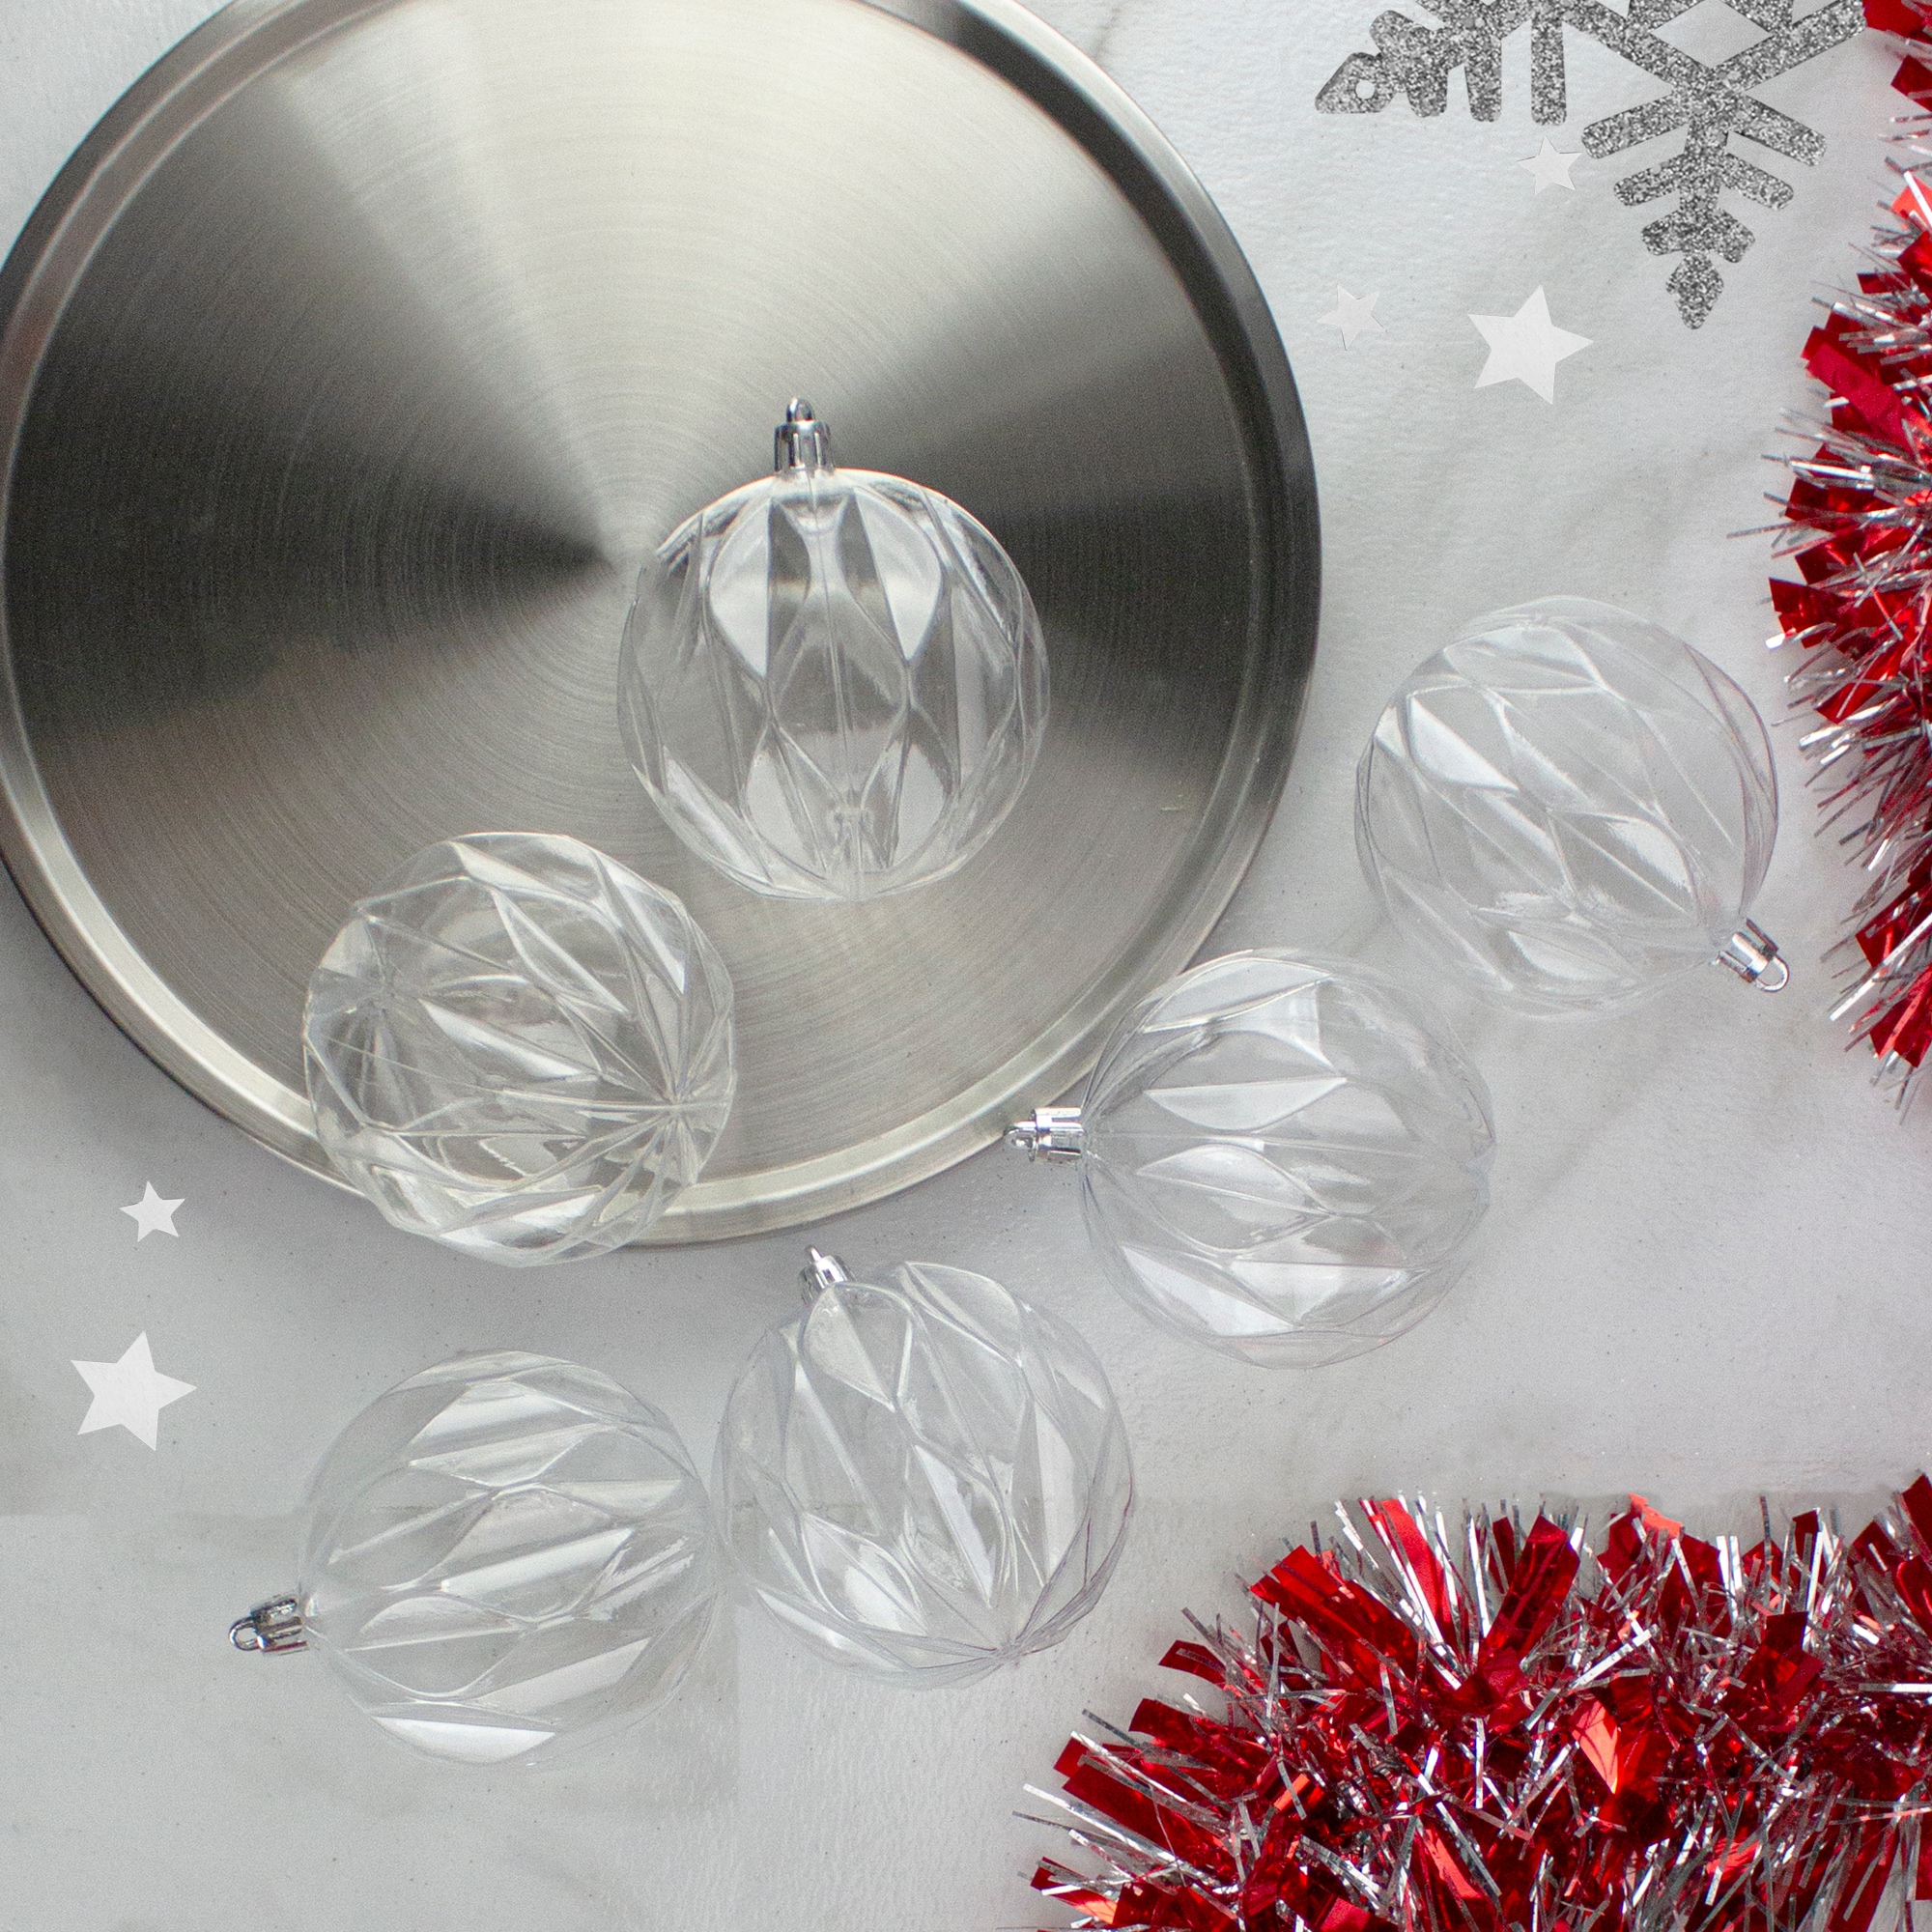 Package of 12 clear plastic ornament balls - 70mm 